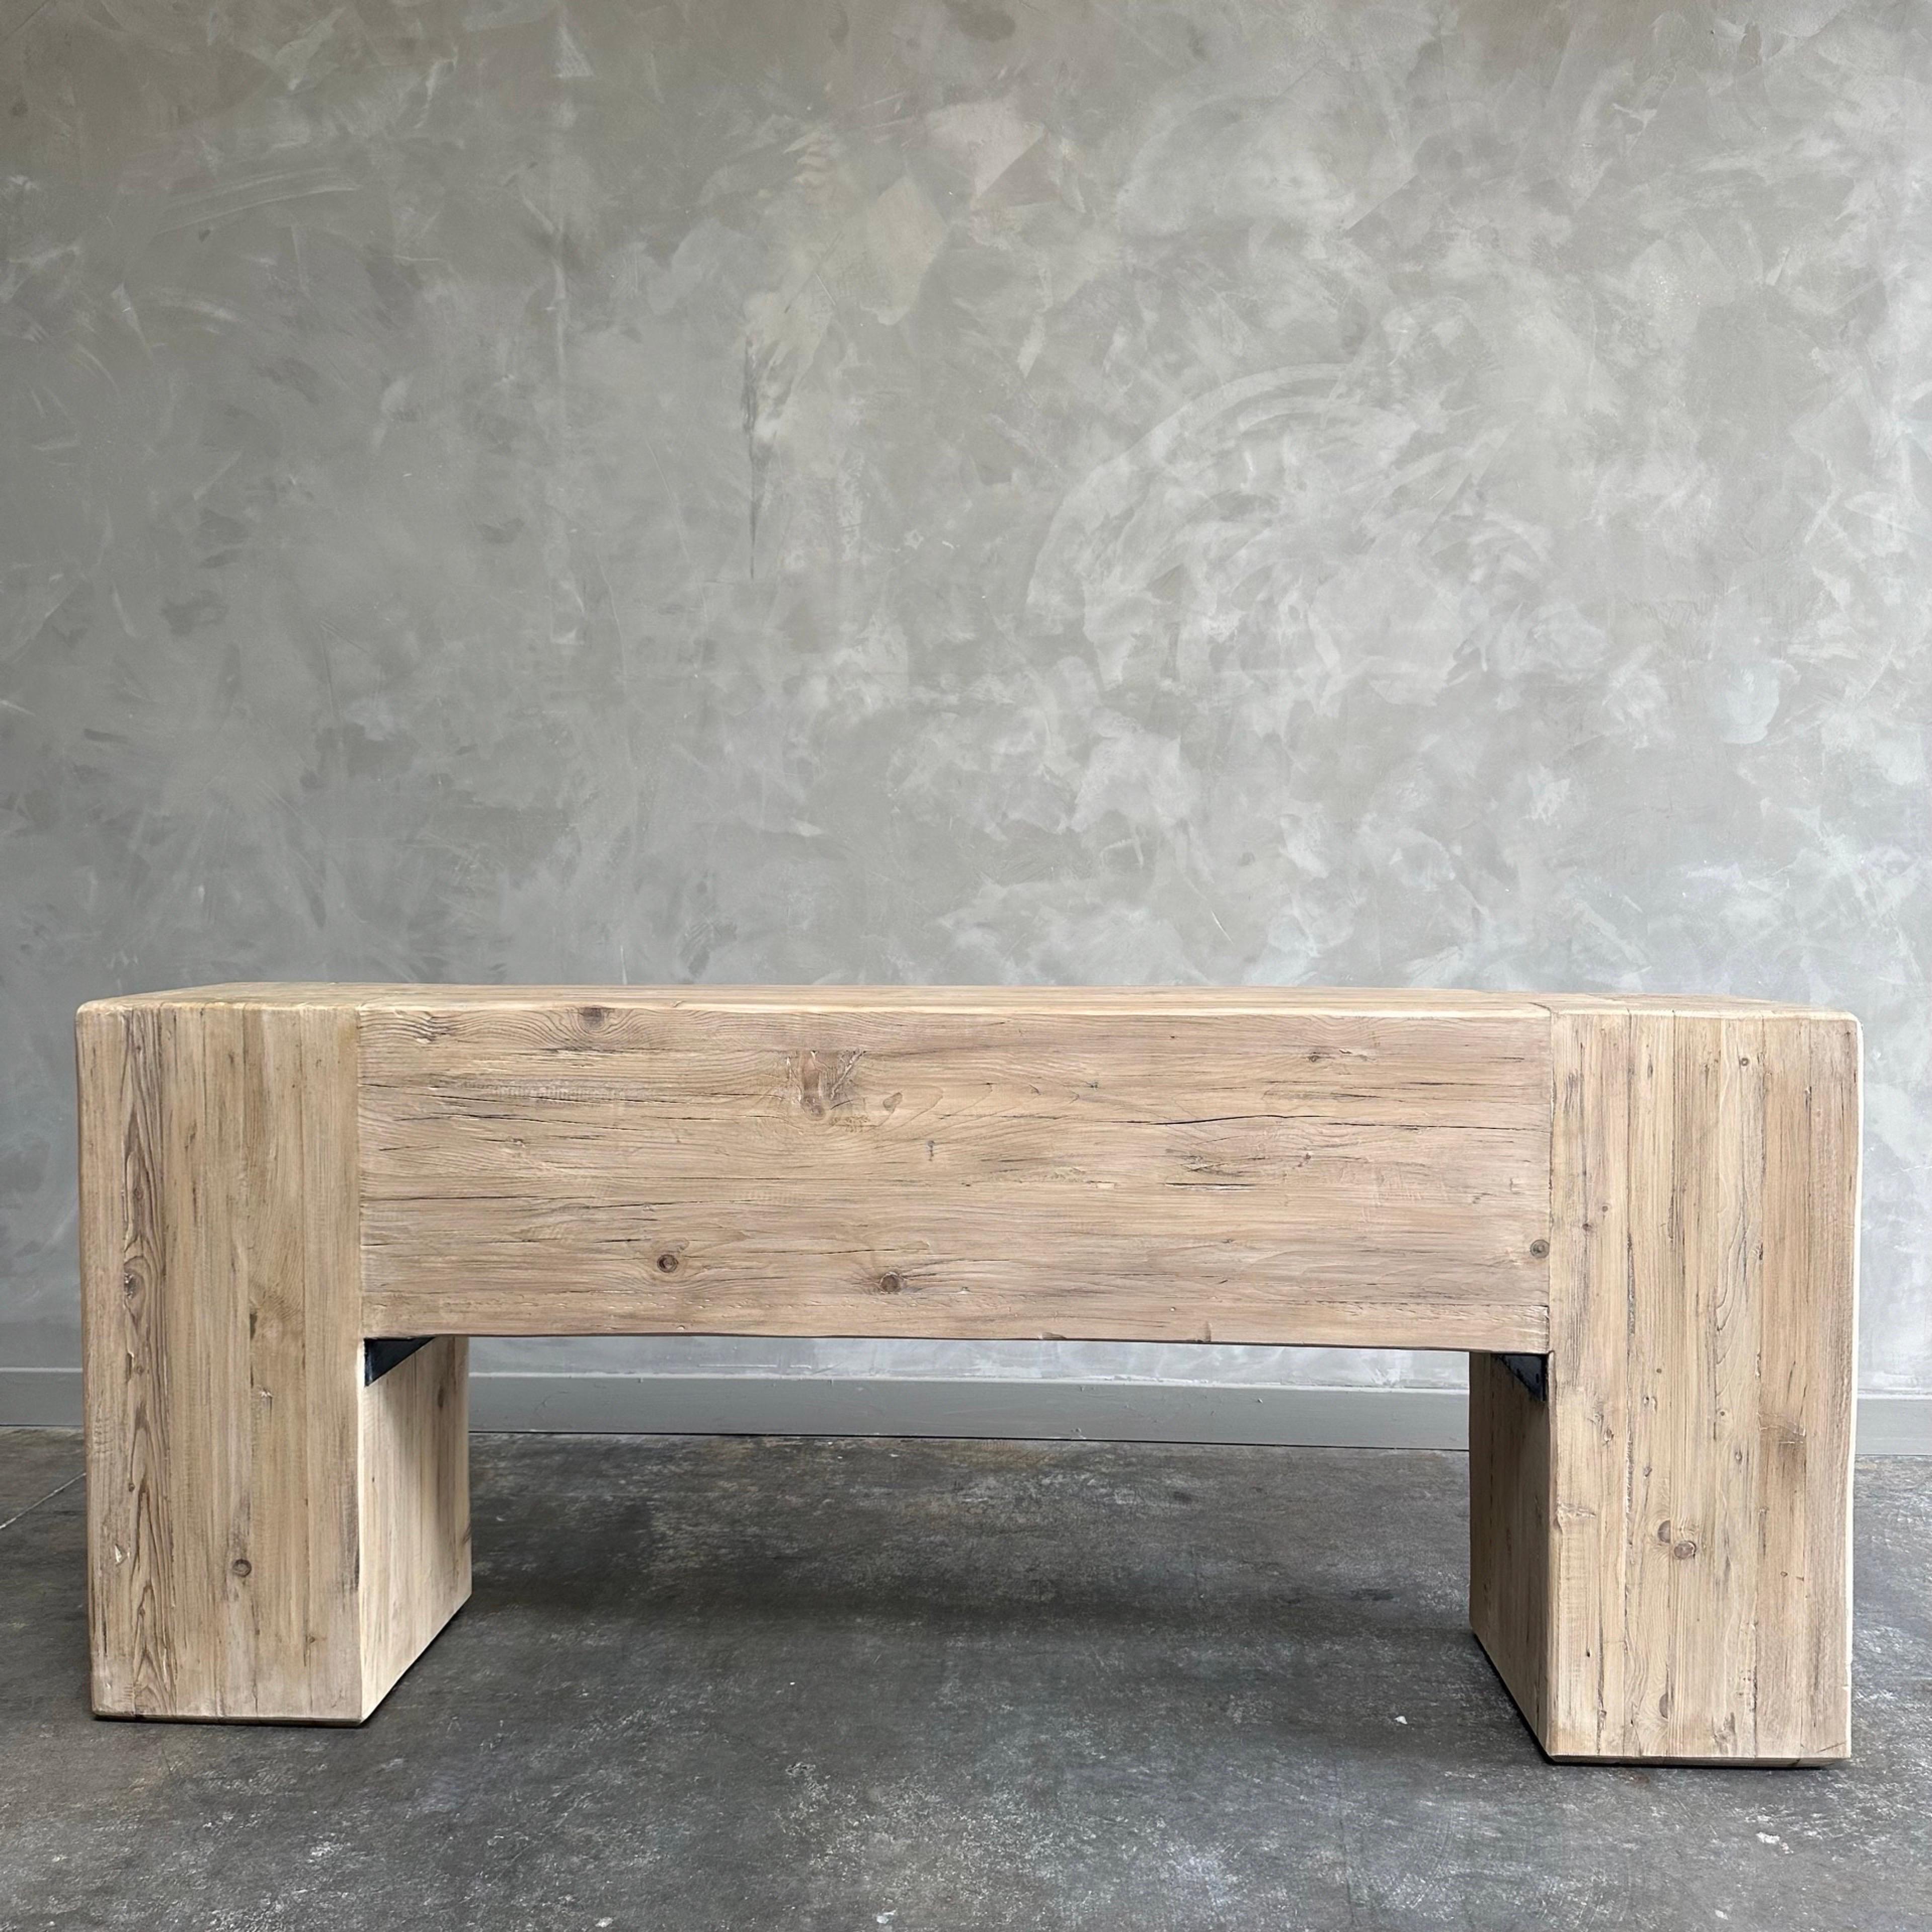 Custom made beam style console table by bloom home inc. 
These old elm and reclaimed pine timbers show in its most primal, natural form. The artisanal construction methods highlight the elm woods beautiful grain pattern & knots and fissures from